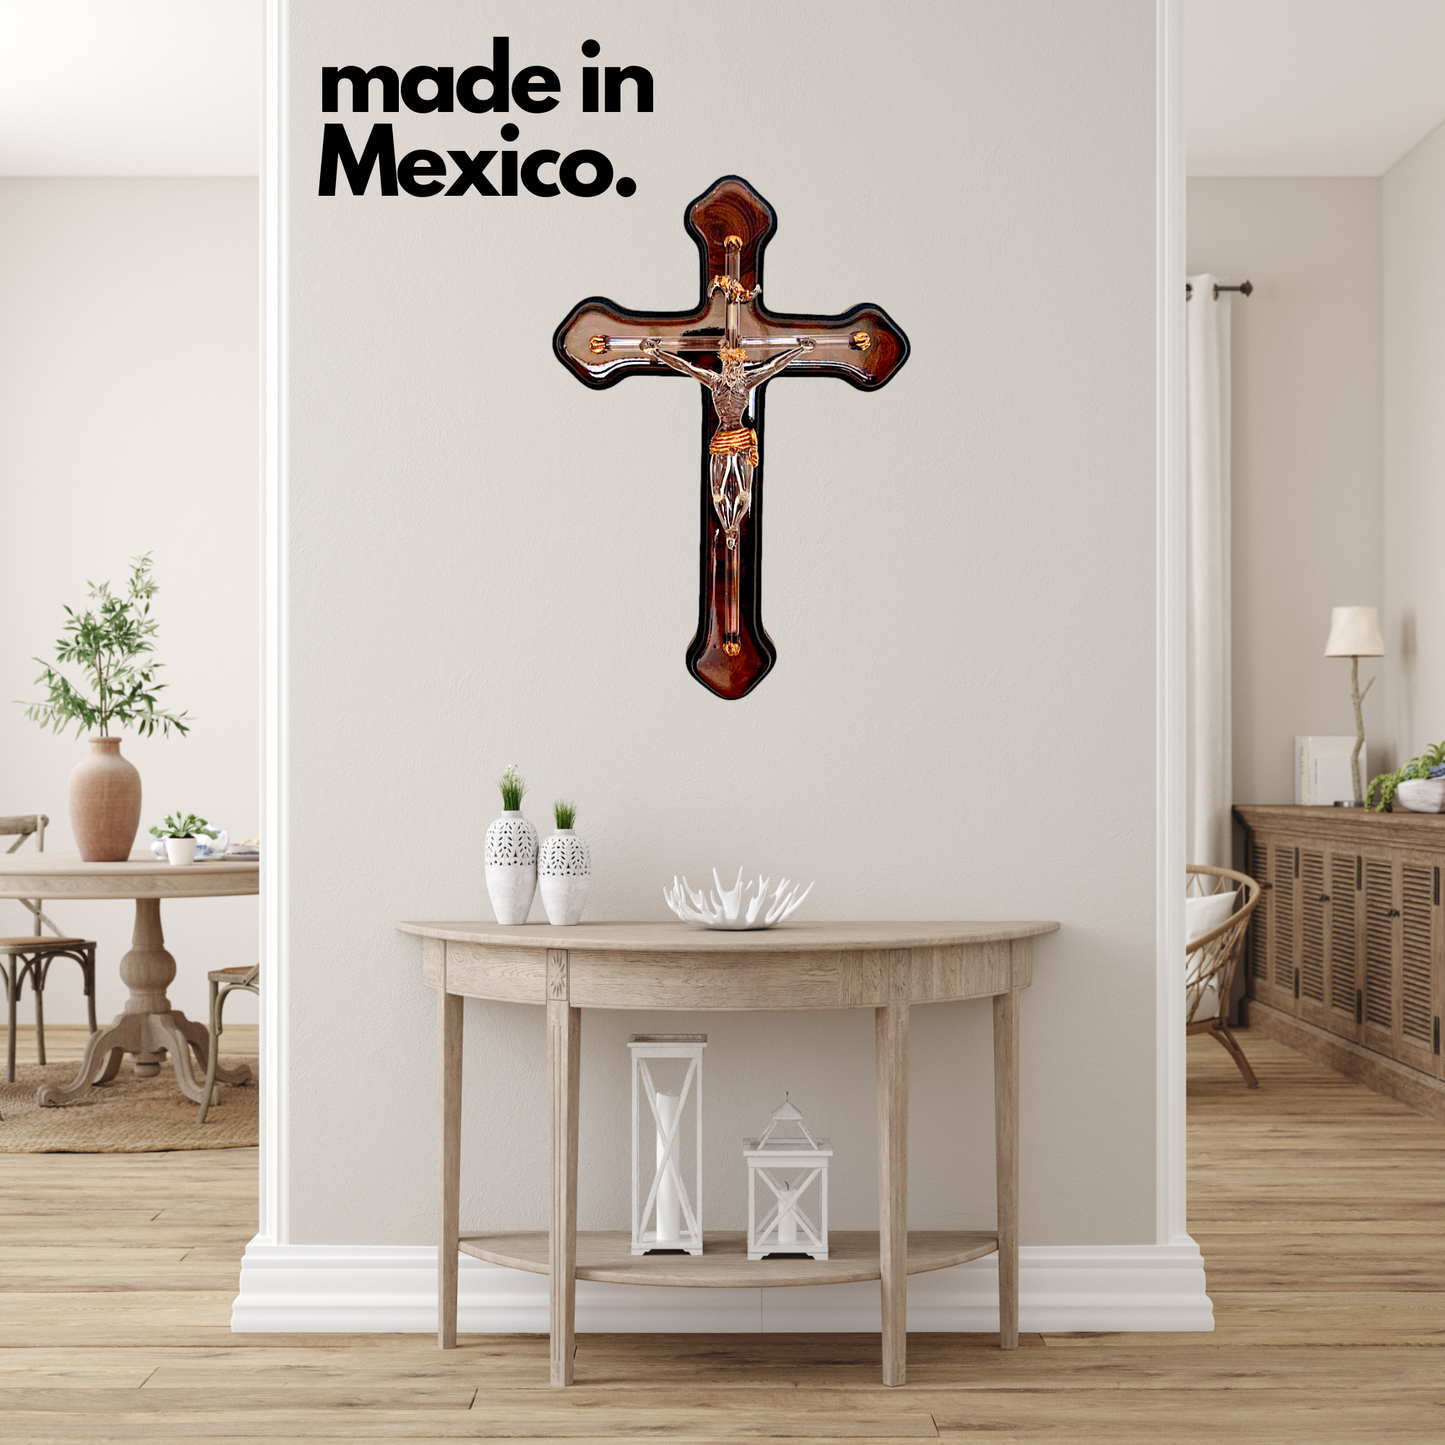 Handmade blown glass sculpture of Jesus on the cross, measuring 7" by 7". Perfect as a unique wall decoration.